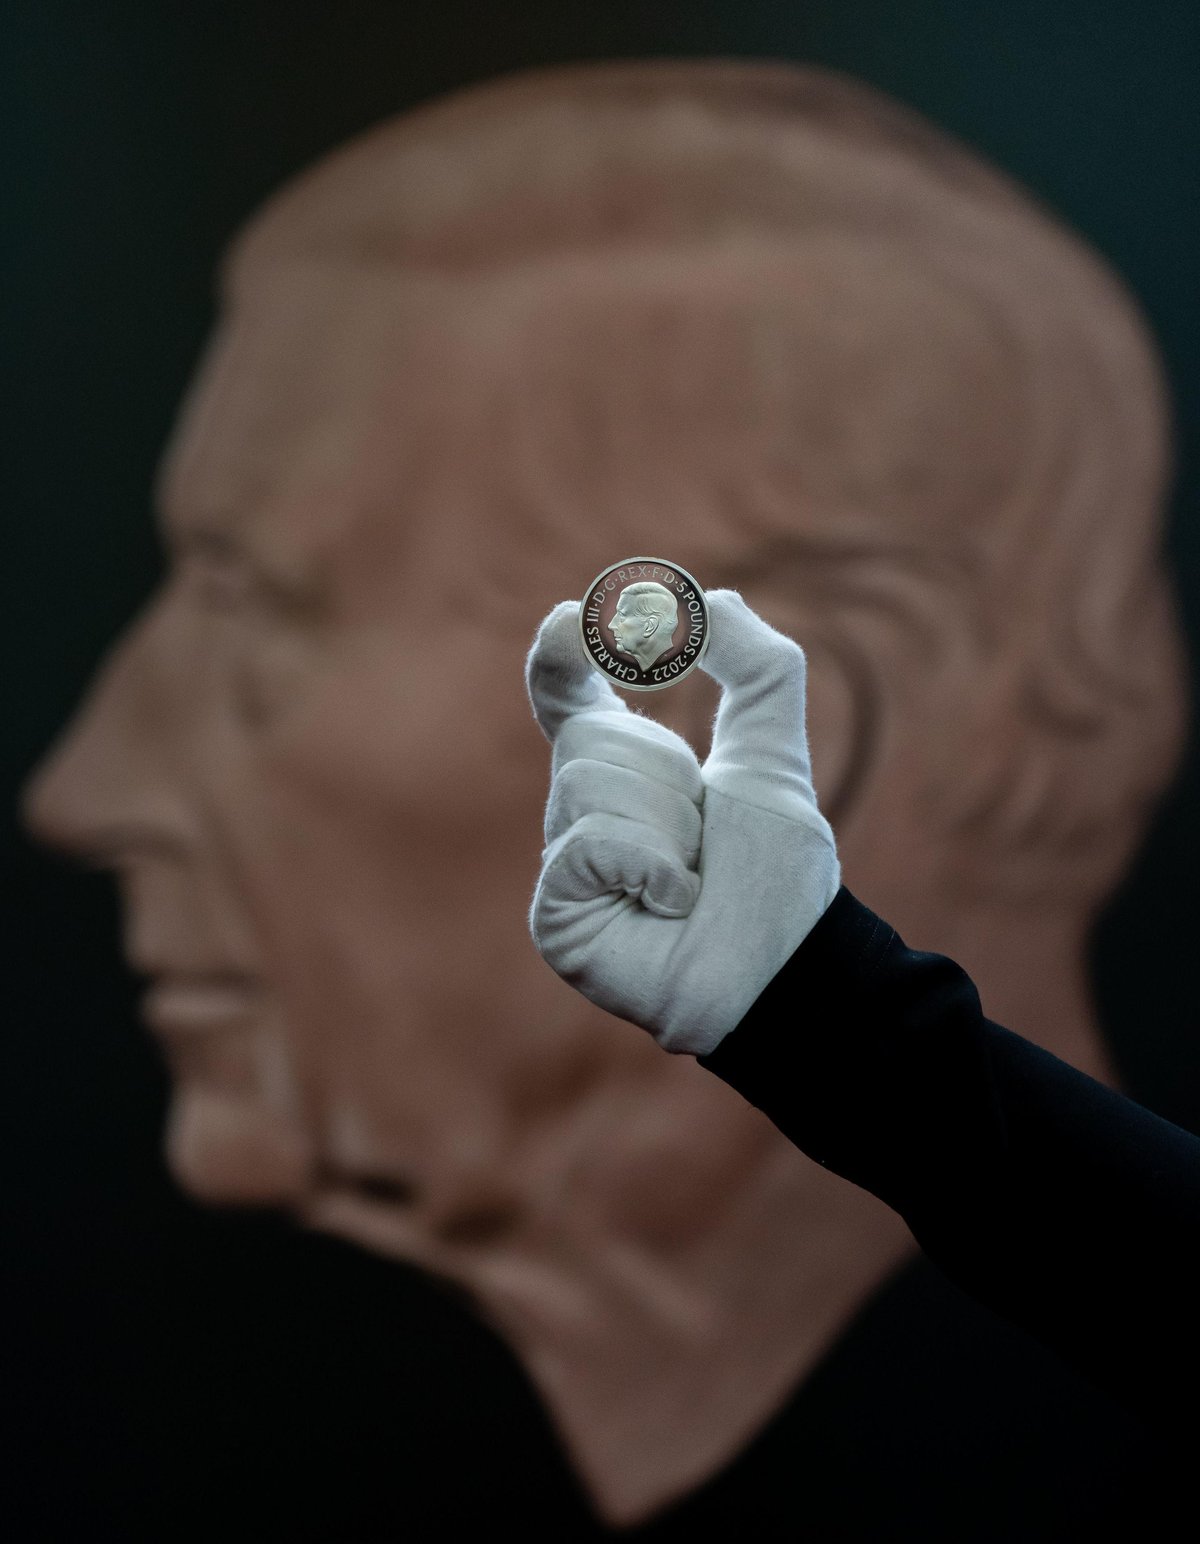 King Charles coin portrait unveiled by the Royal Mint